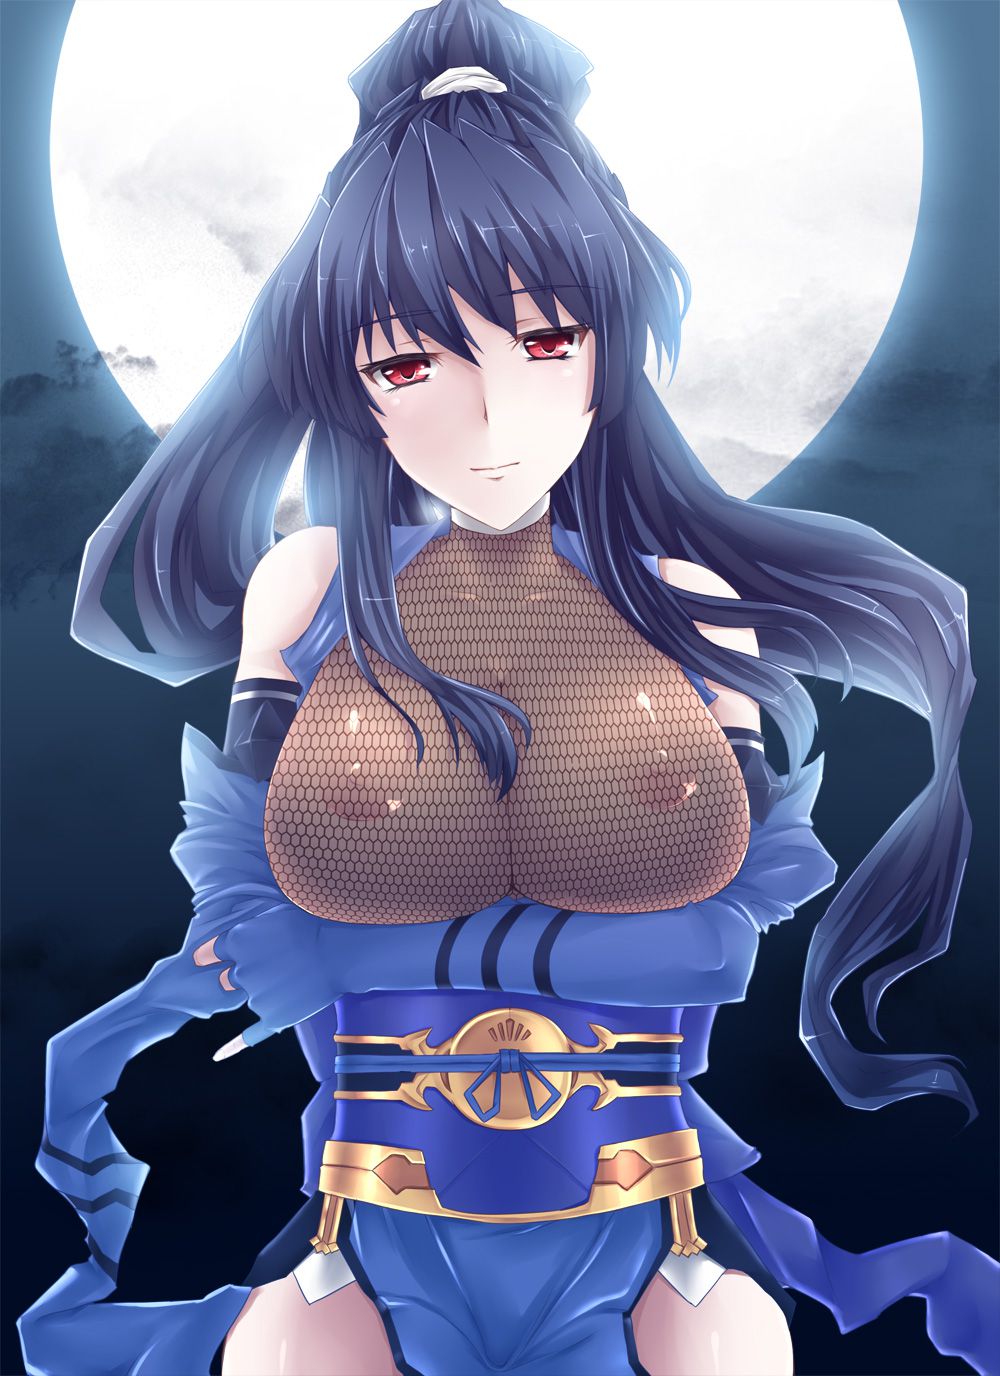 Erotic moe image ww Part10 [※ There is an image] of a girl who wore a naughty woman ninja costume that looks a little lewd girl legs and crotch Chilla 21